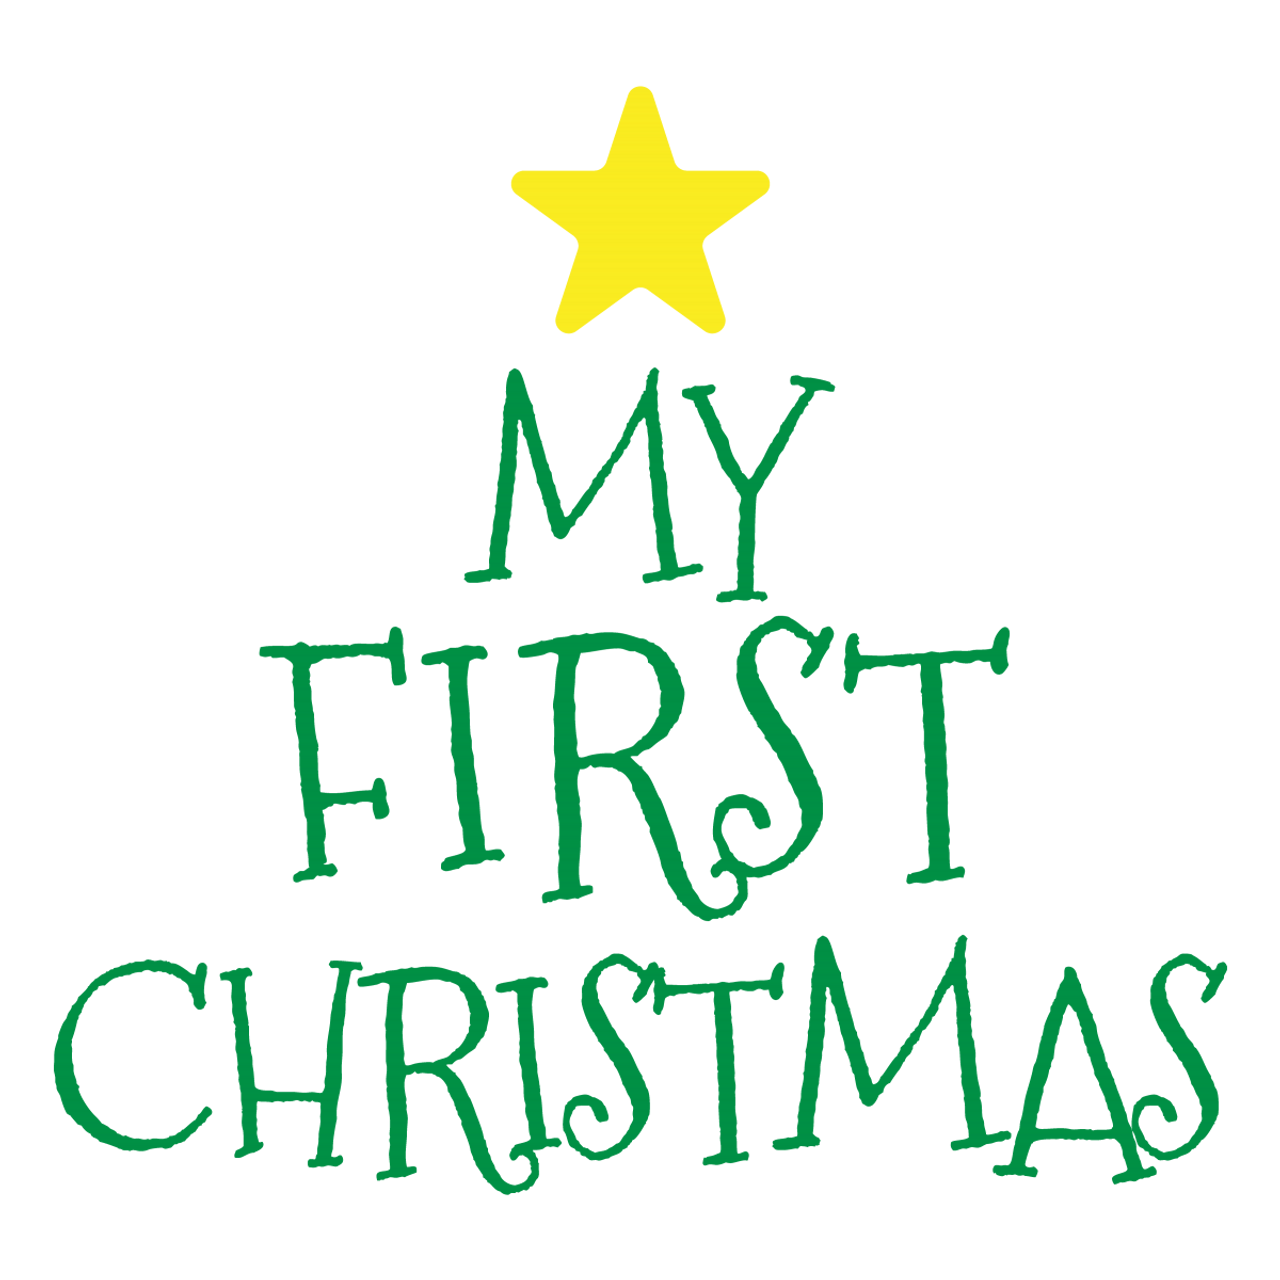 Download My First Christmas SVG - SVG EPS PNG DXF Cut Files for ...